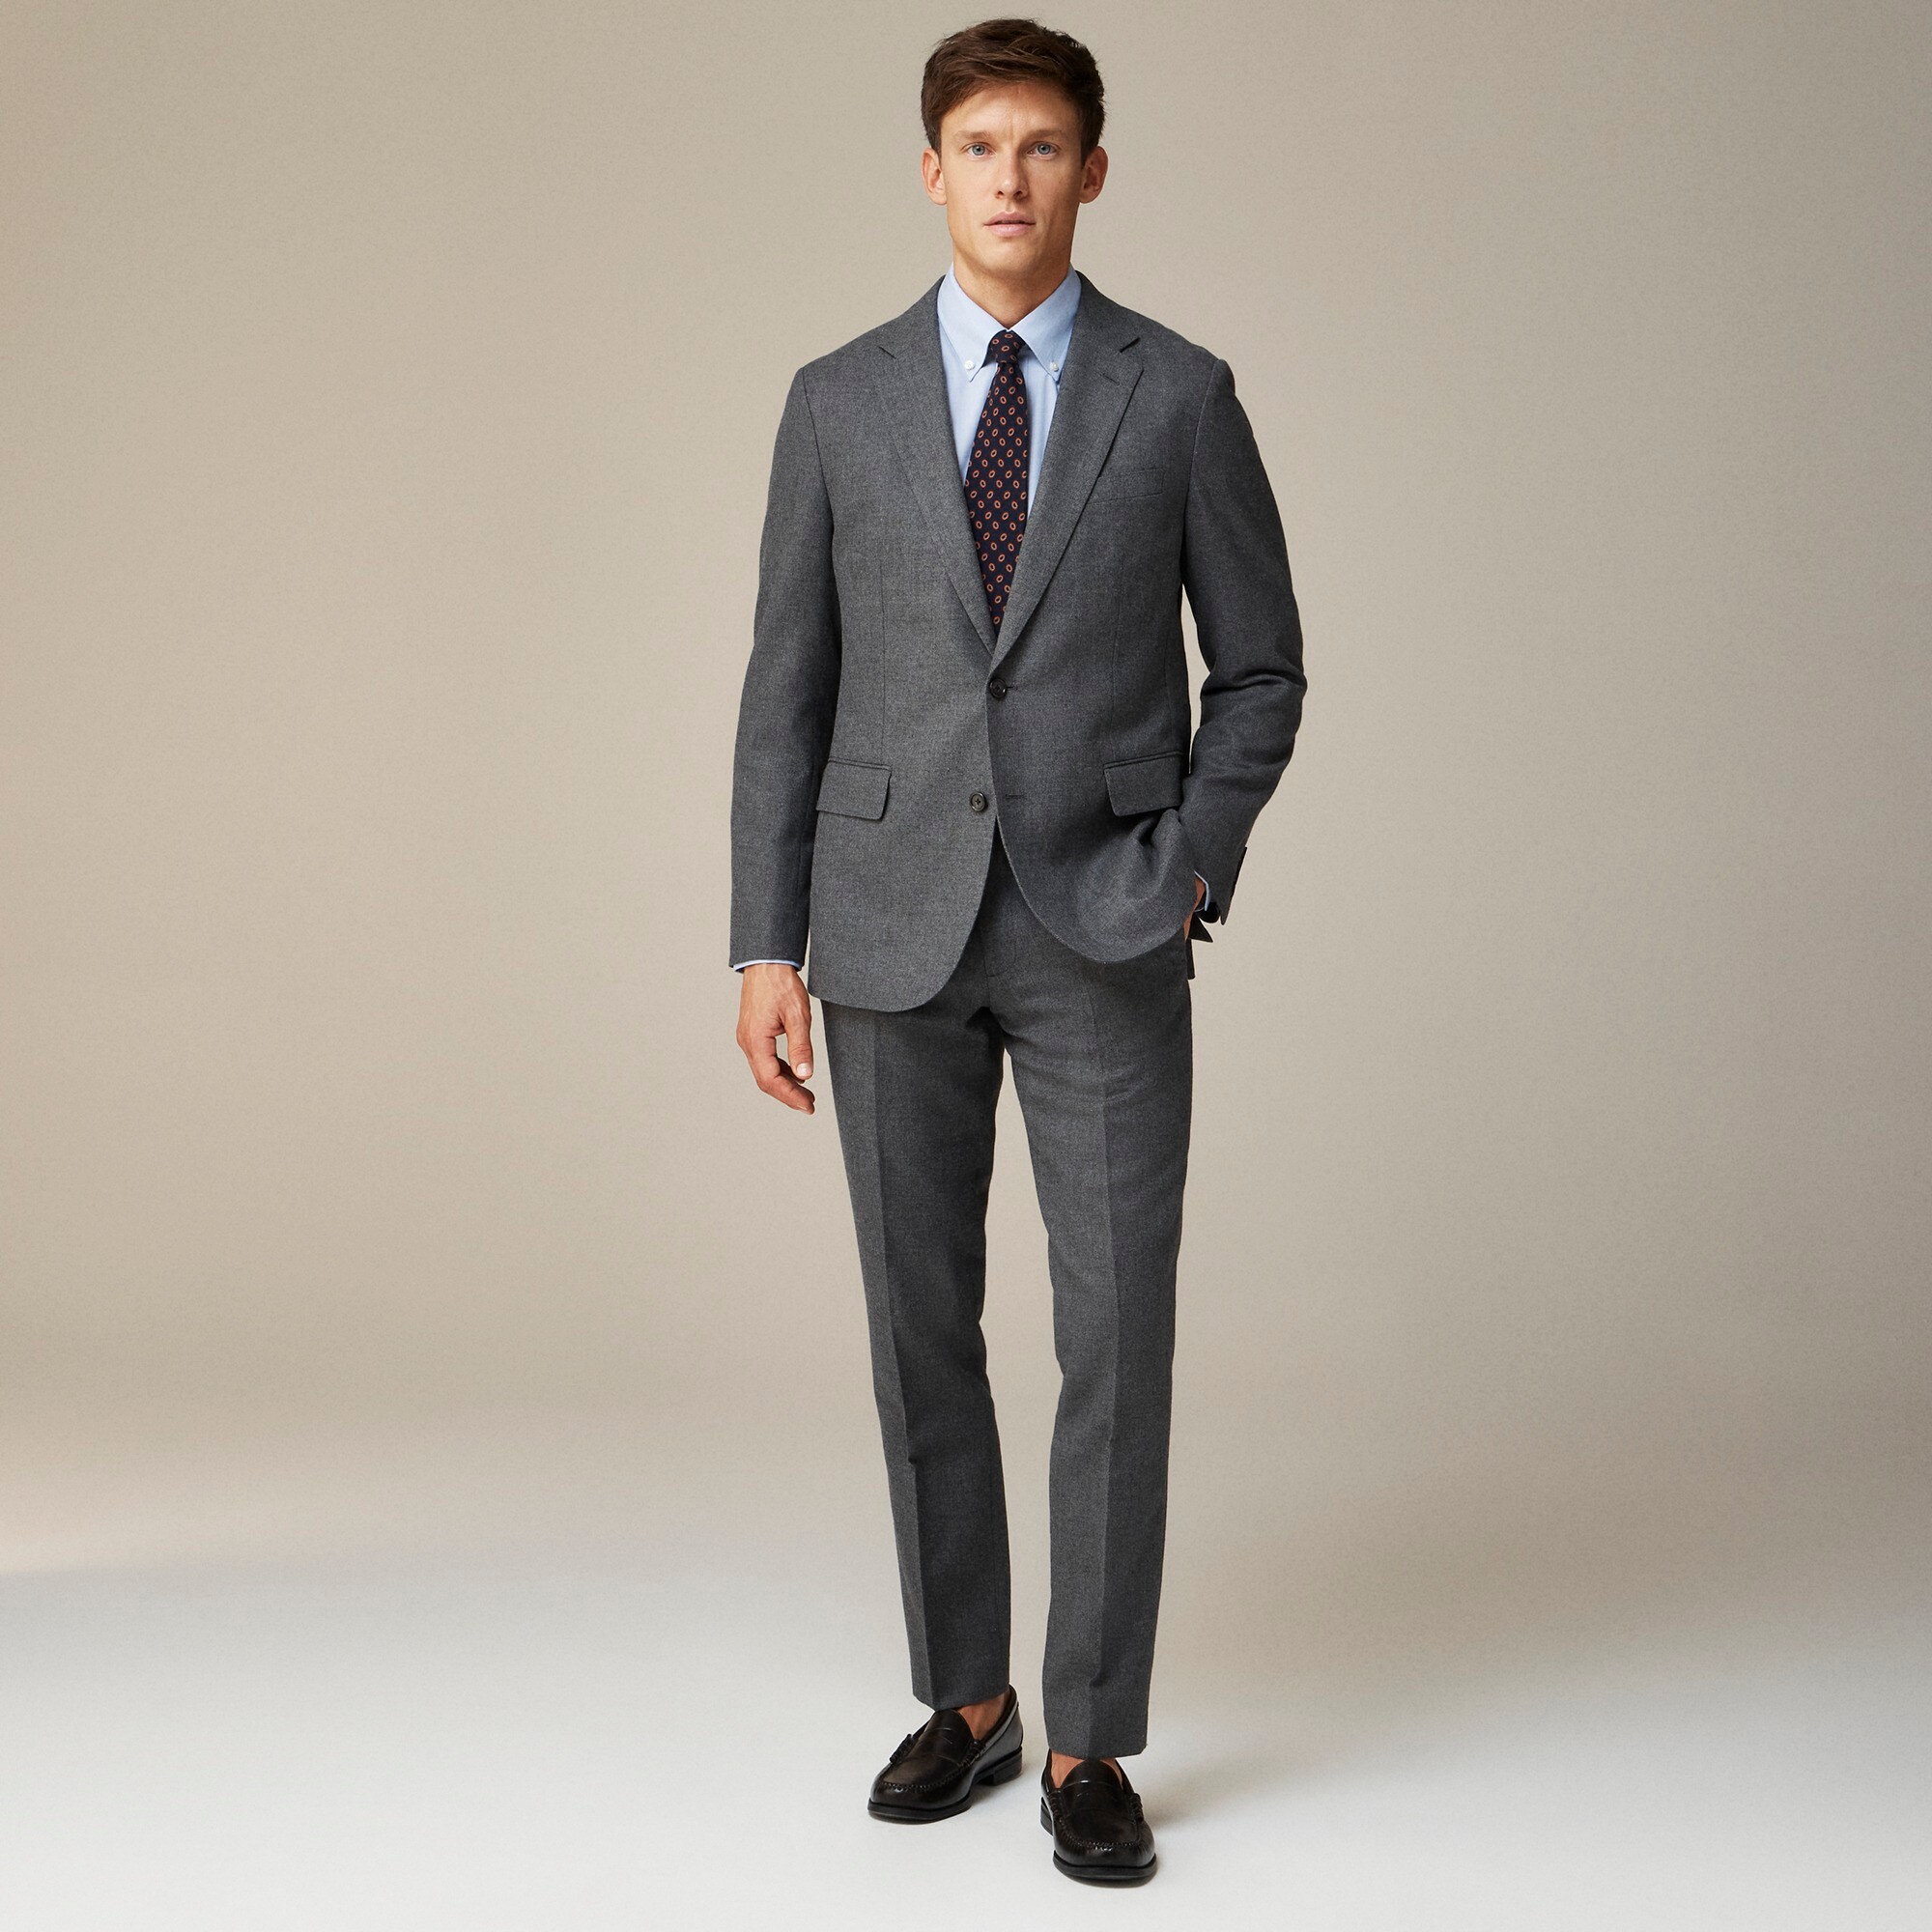  Ludlow Slim-fit suit jacket in English cotton-wool blend